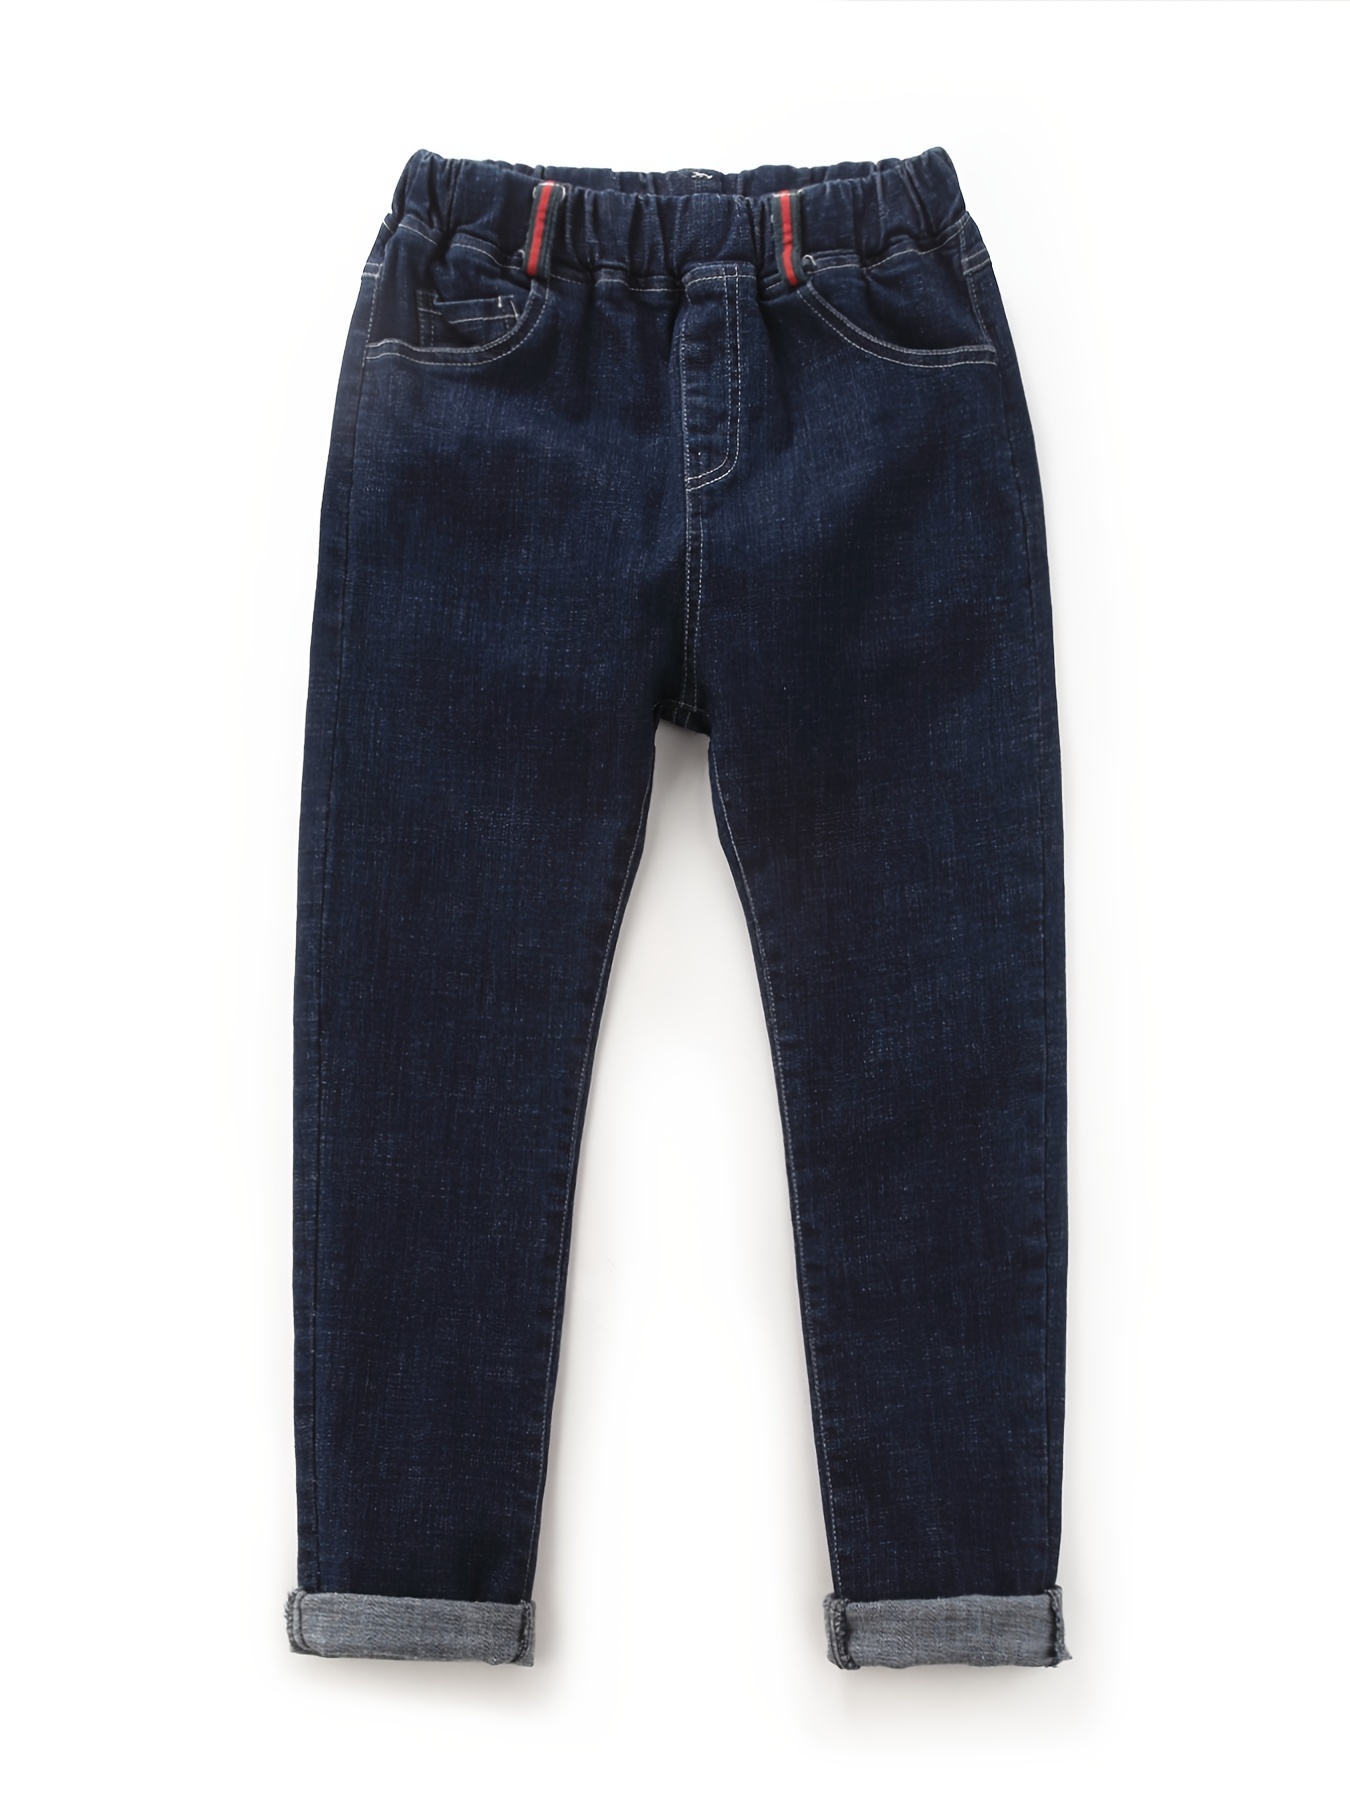 Boys Classic Denim Long Pants With Pocket, Kids Clothing For